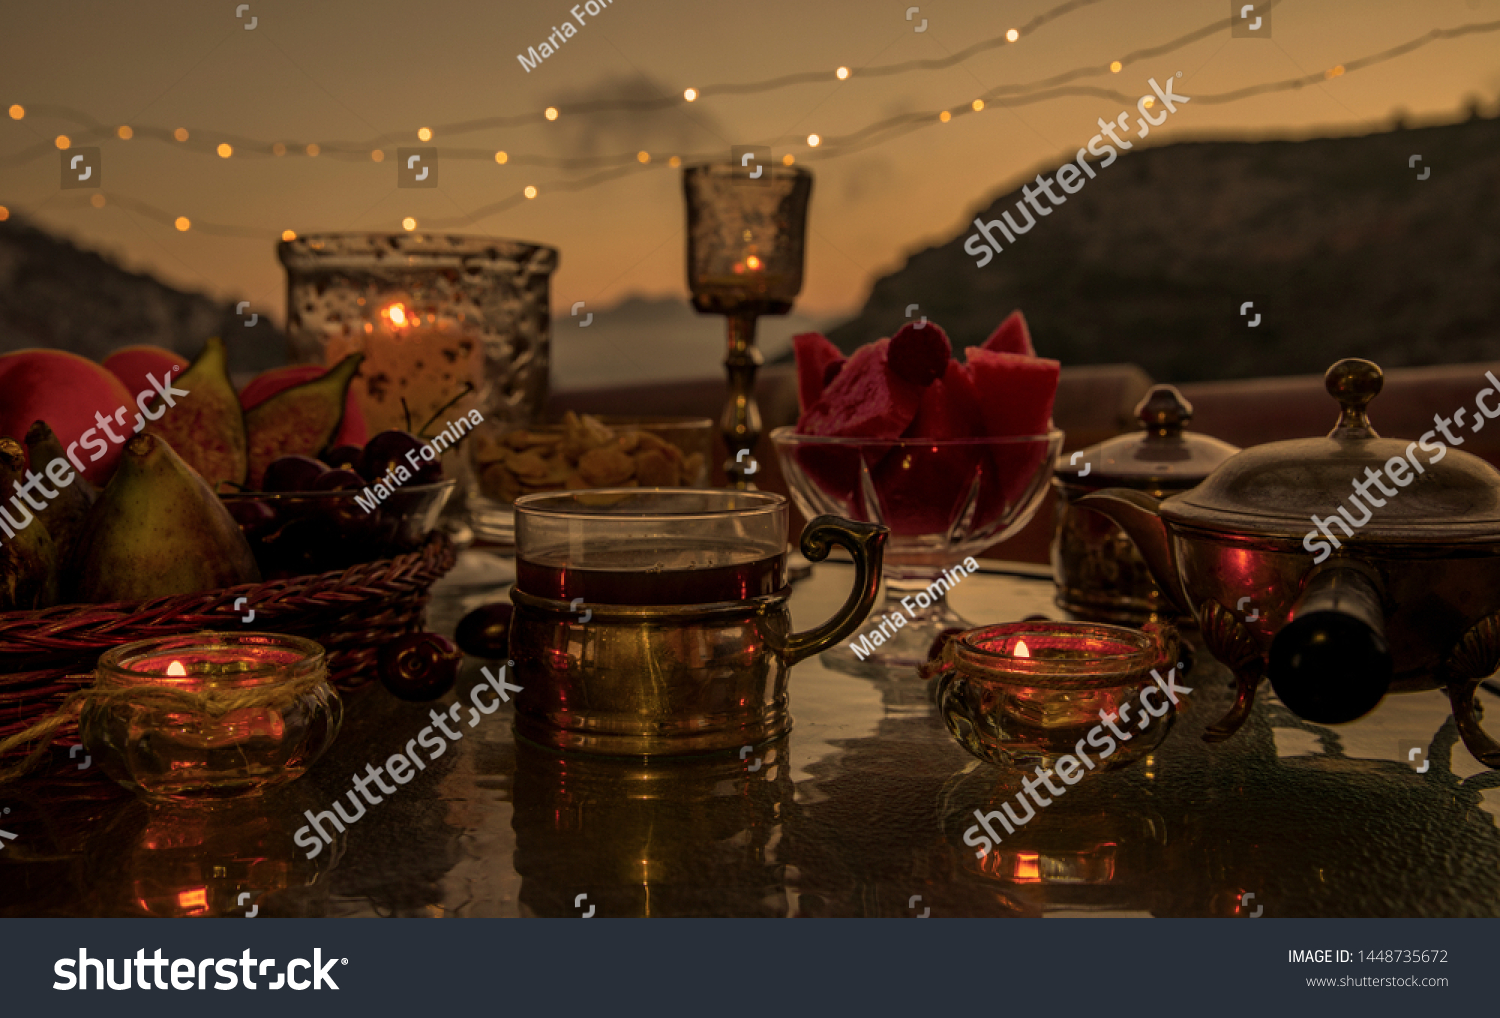 Evening tea. Evening tea with sweets. Very cozy vintage style still life on the background of a garland of light bulbs and the night sky. #1448735672